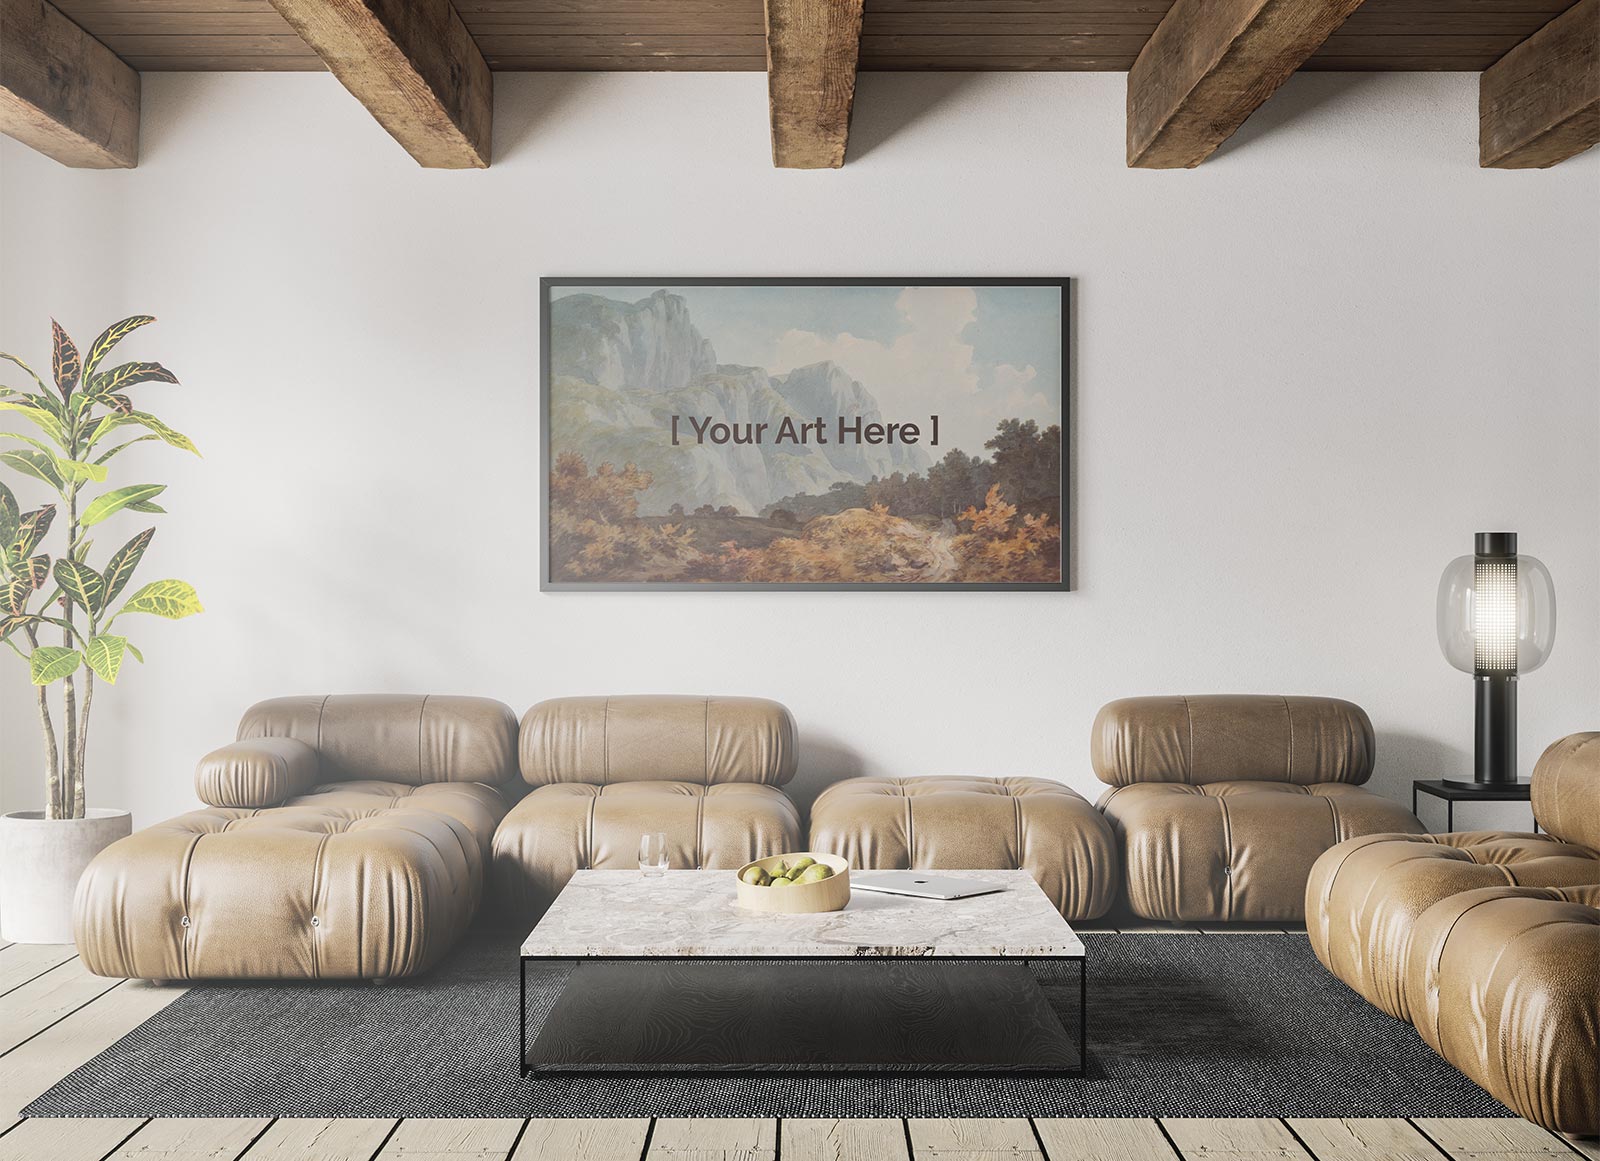 Free-Landscape-Wall-Frame-Painting-Mockup-PSD